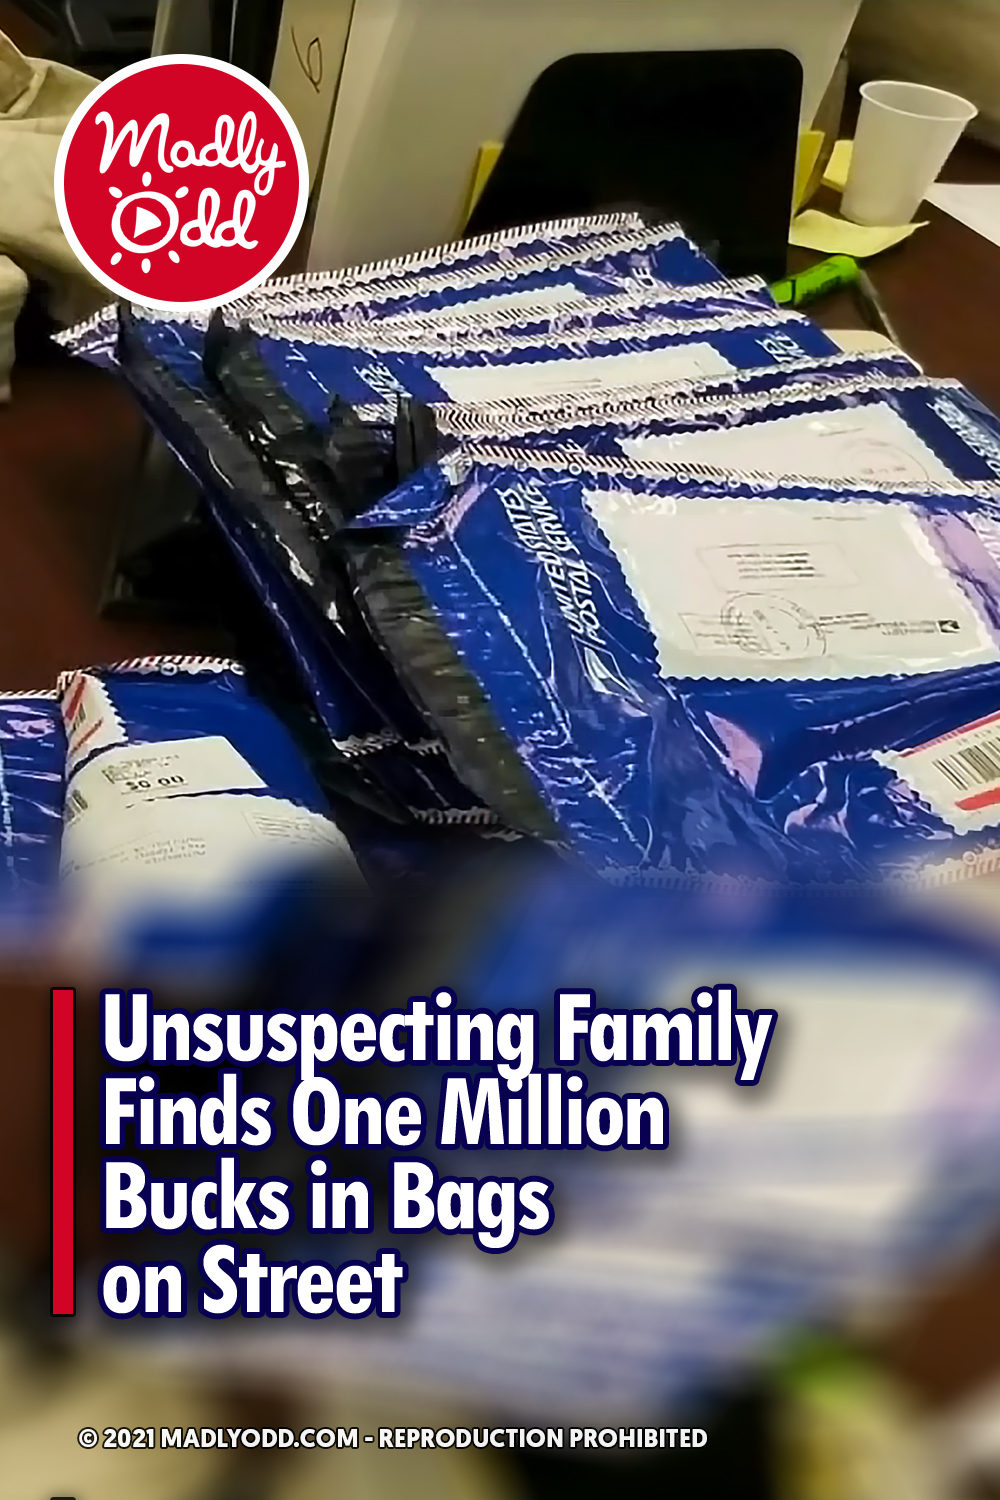 Unsuspecting Family Finds One Million Bucks in Bags on Street